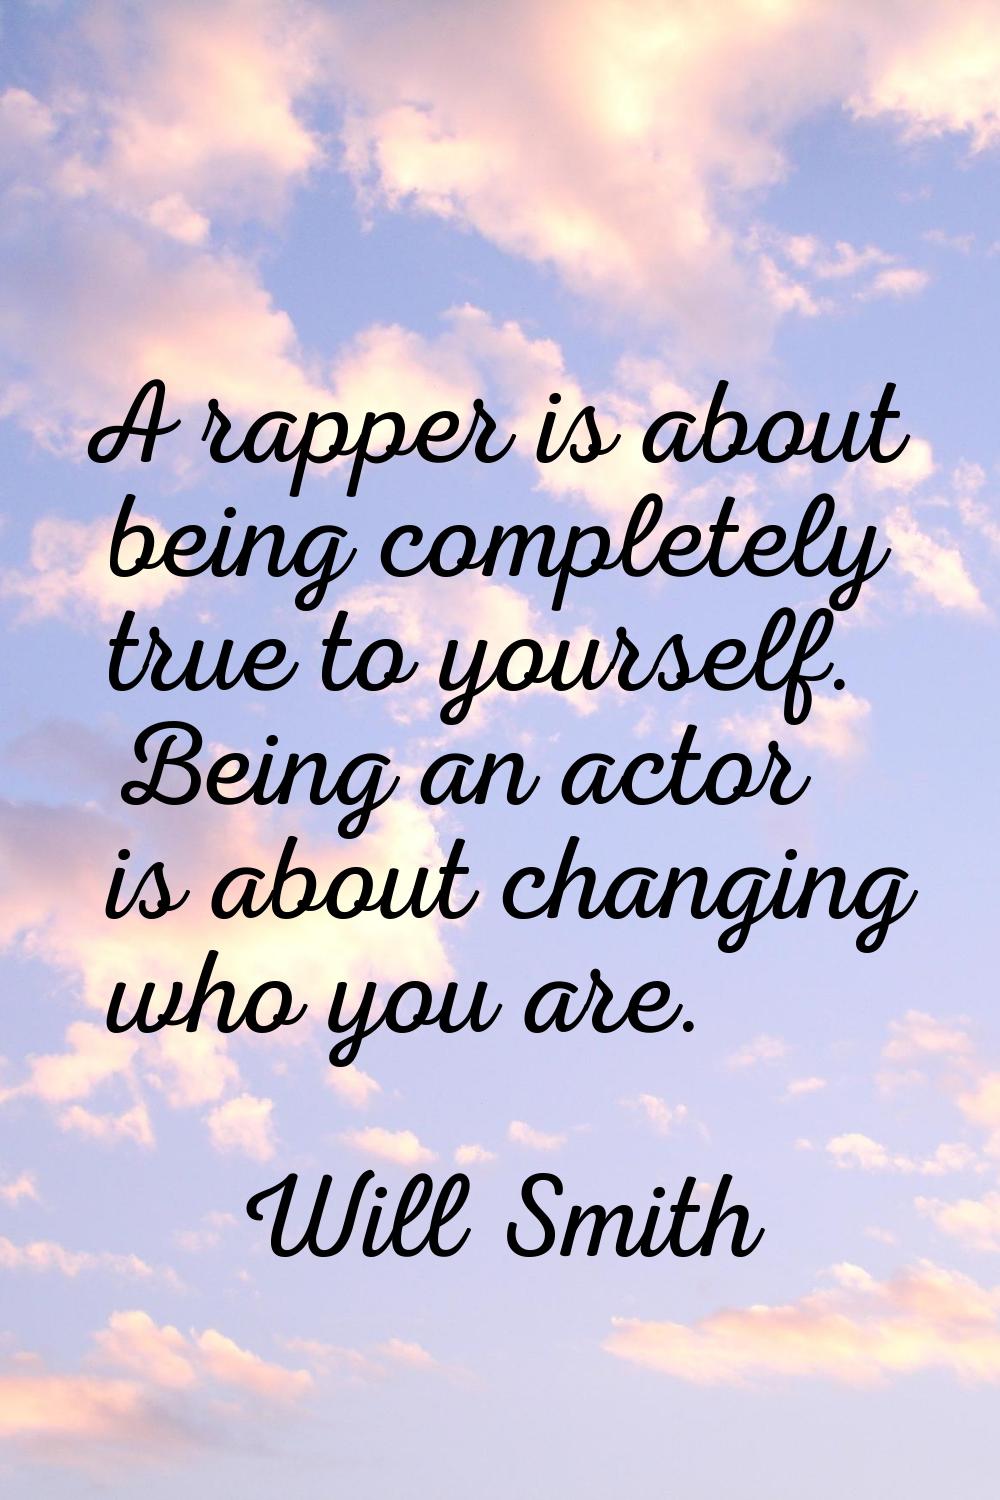 A rapper is about being completely true to yourself. Being an actor is about changing who you are.